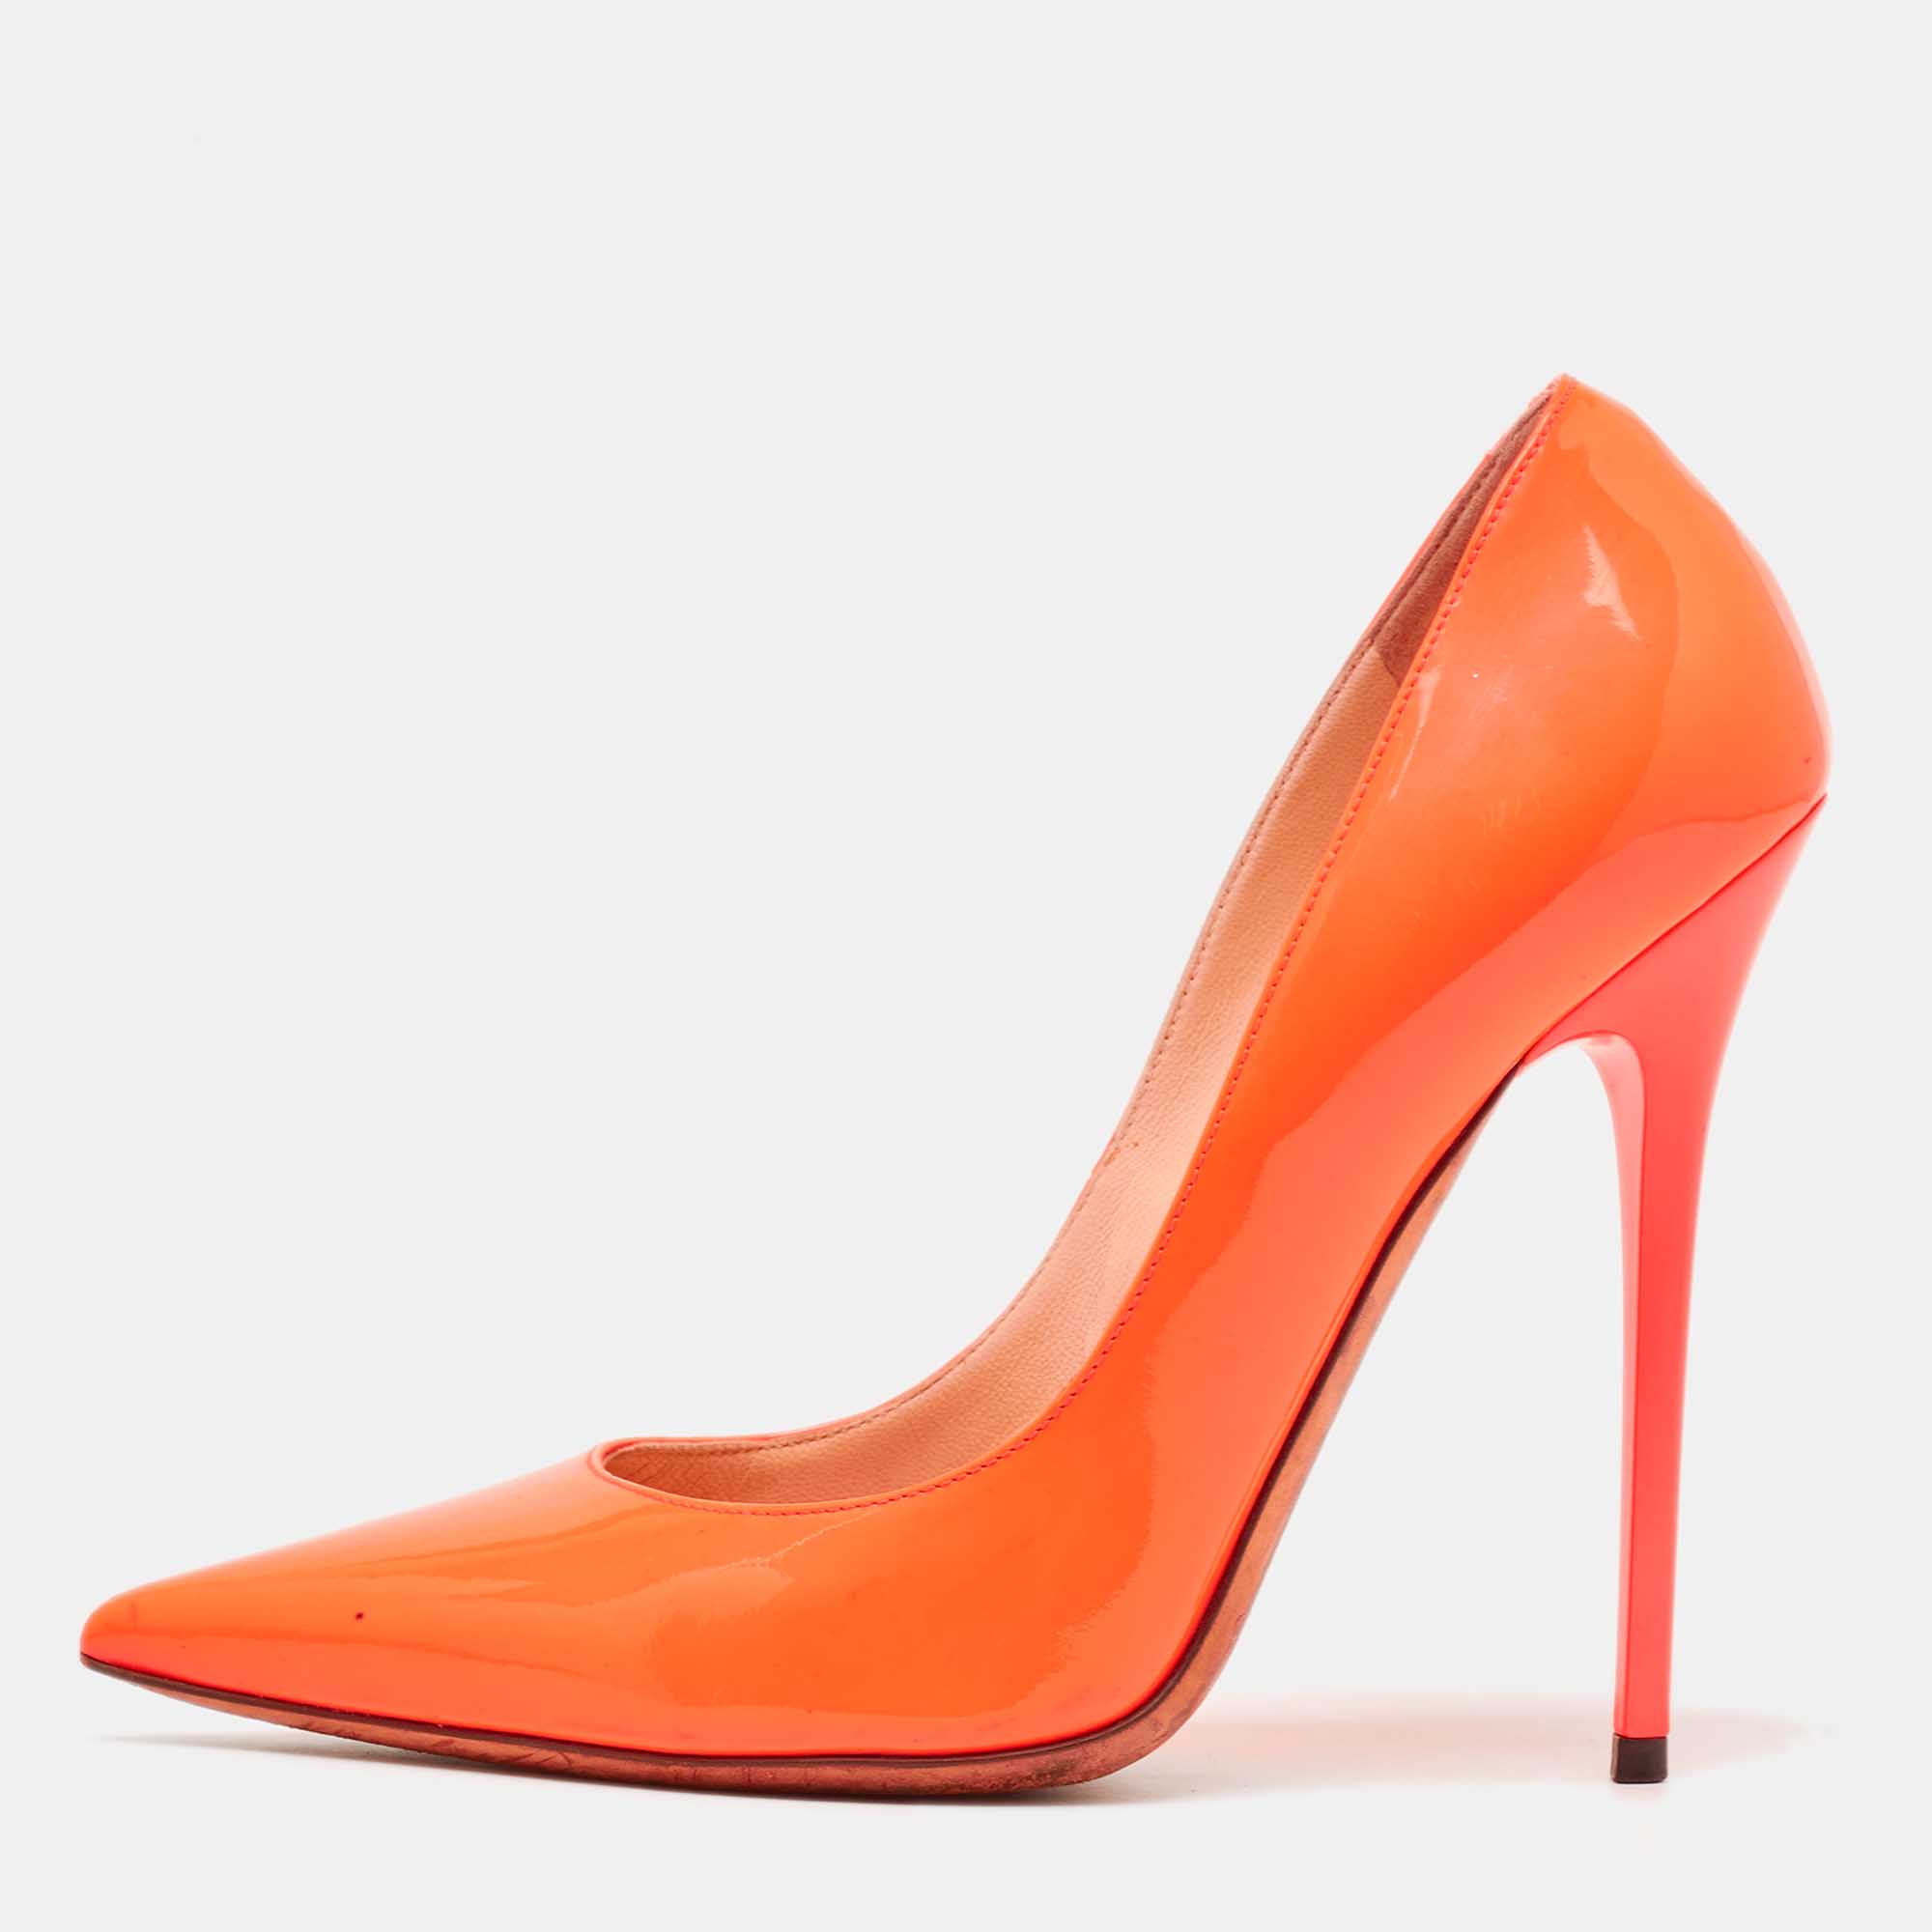 

Jimmy Choo Orange Patent Leather Pointed Toe Pumps Size